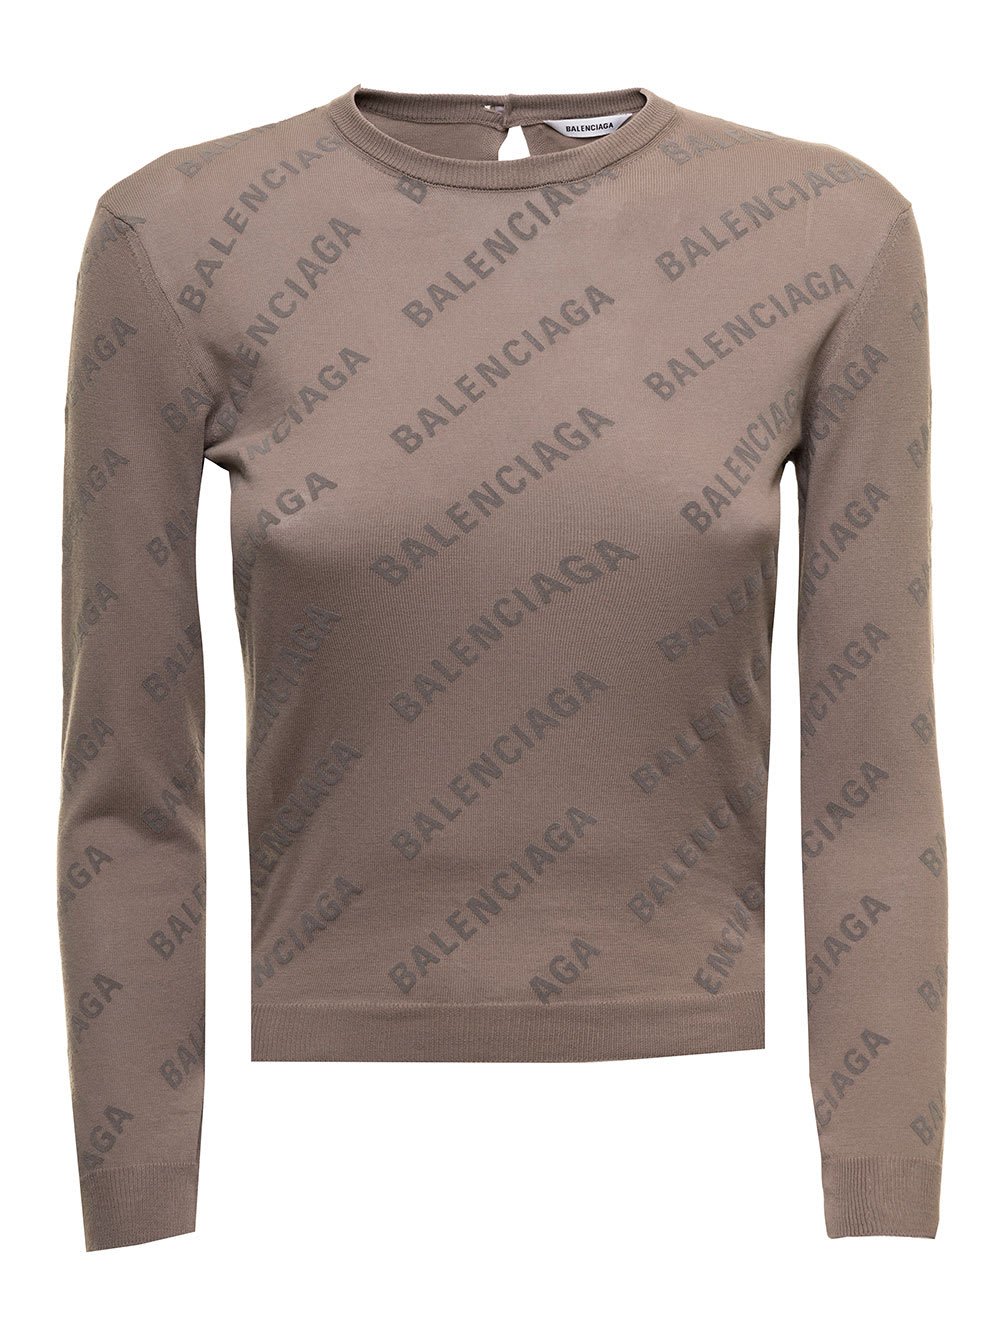 Taupe Top In Jacquard Knit With Allover Logo Pattern Balenciaga Woman